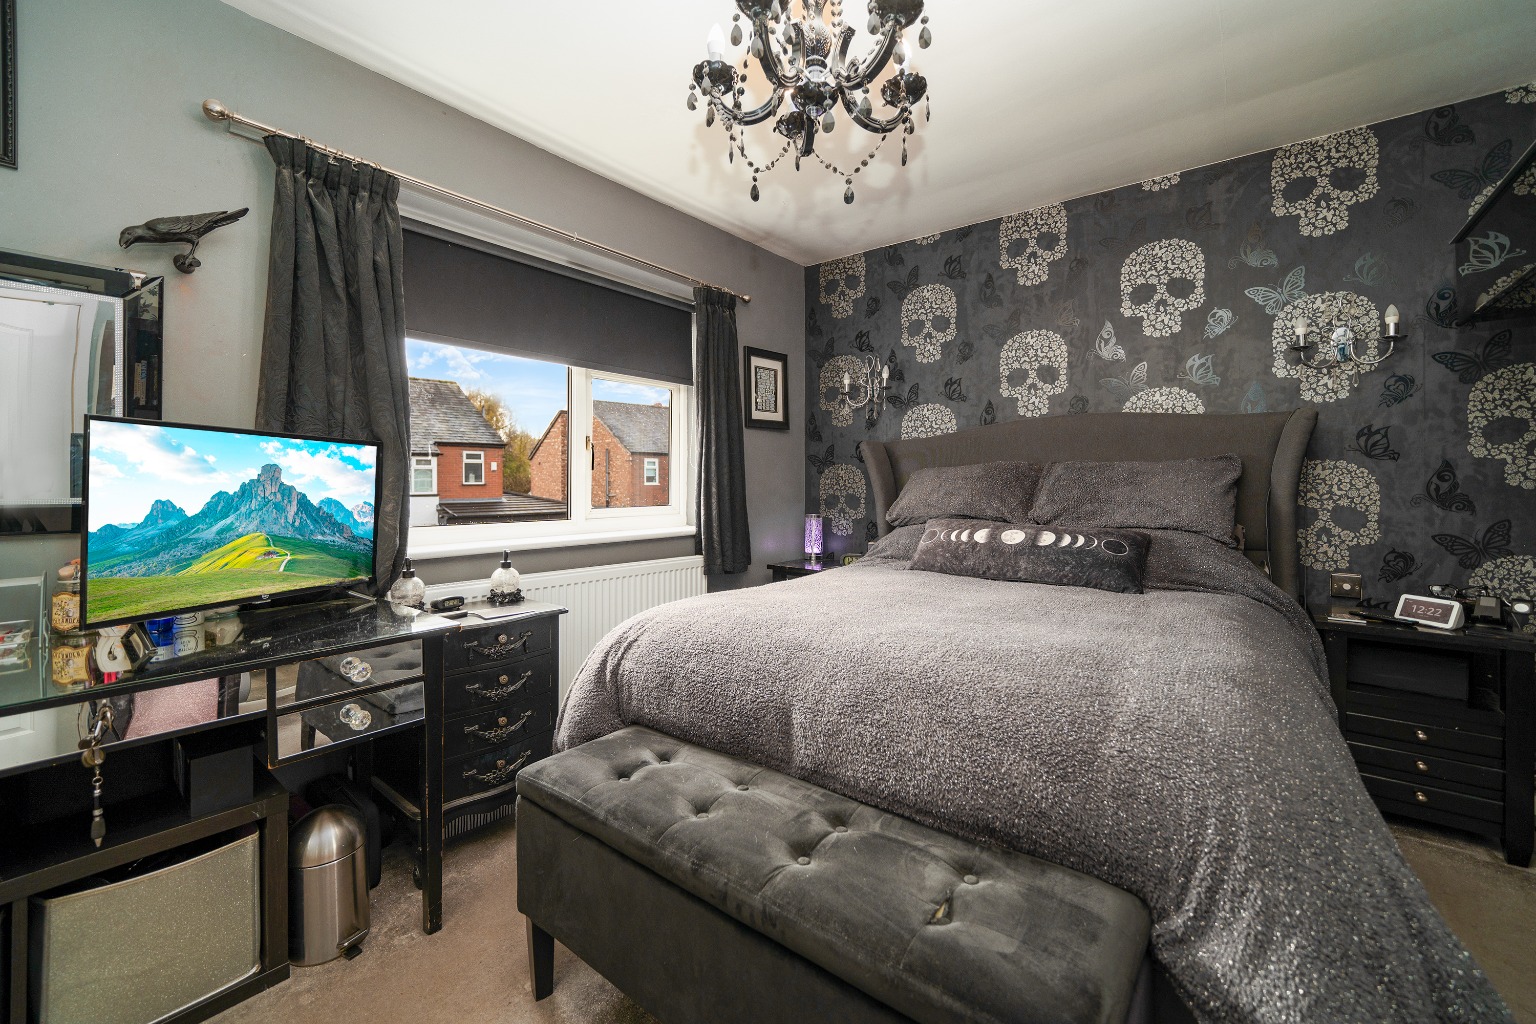 Images for Howard Avenue, Cheadle Hulme, SK8 6HH